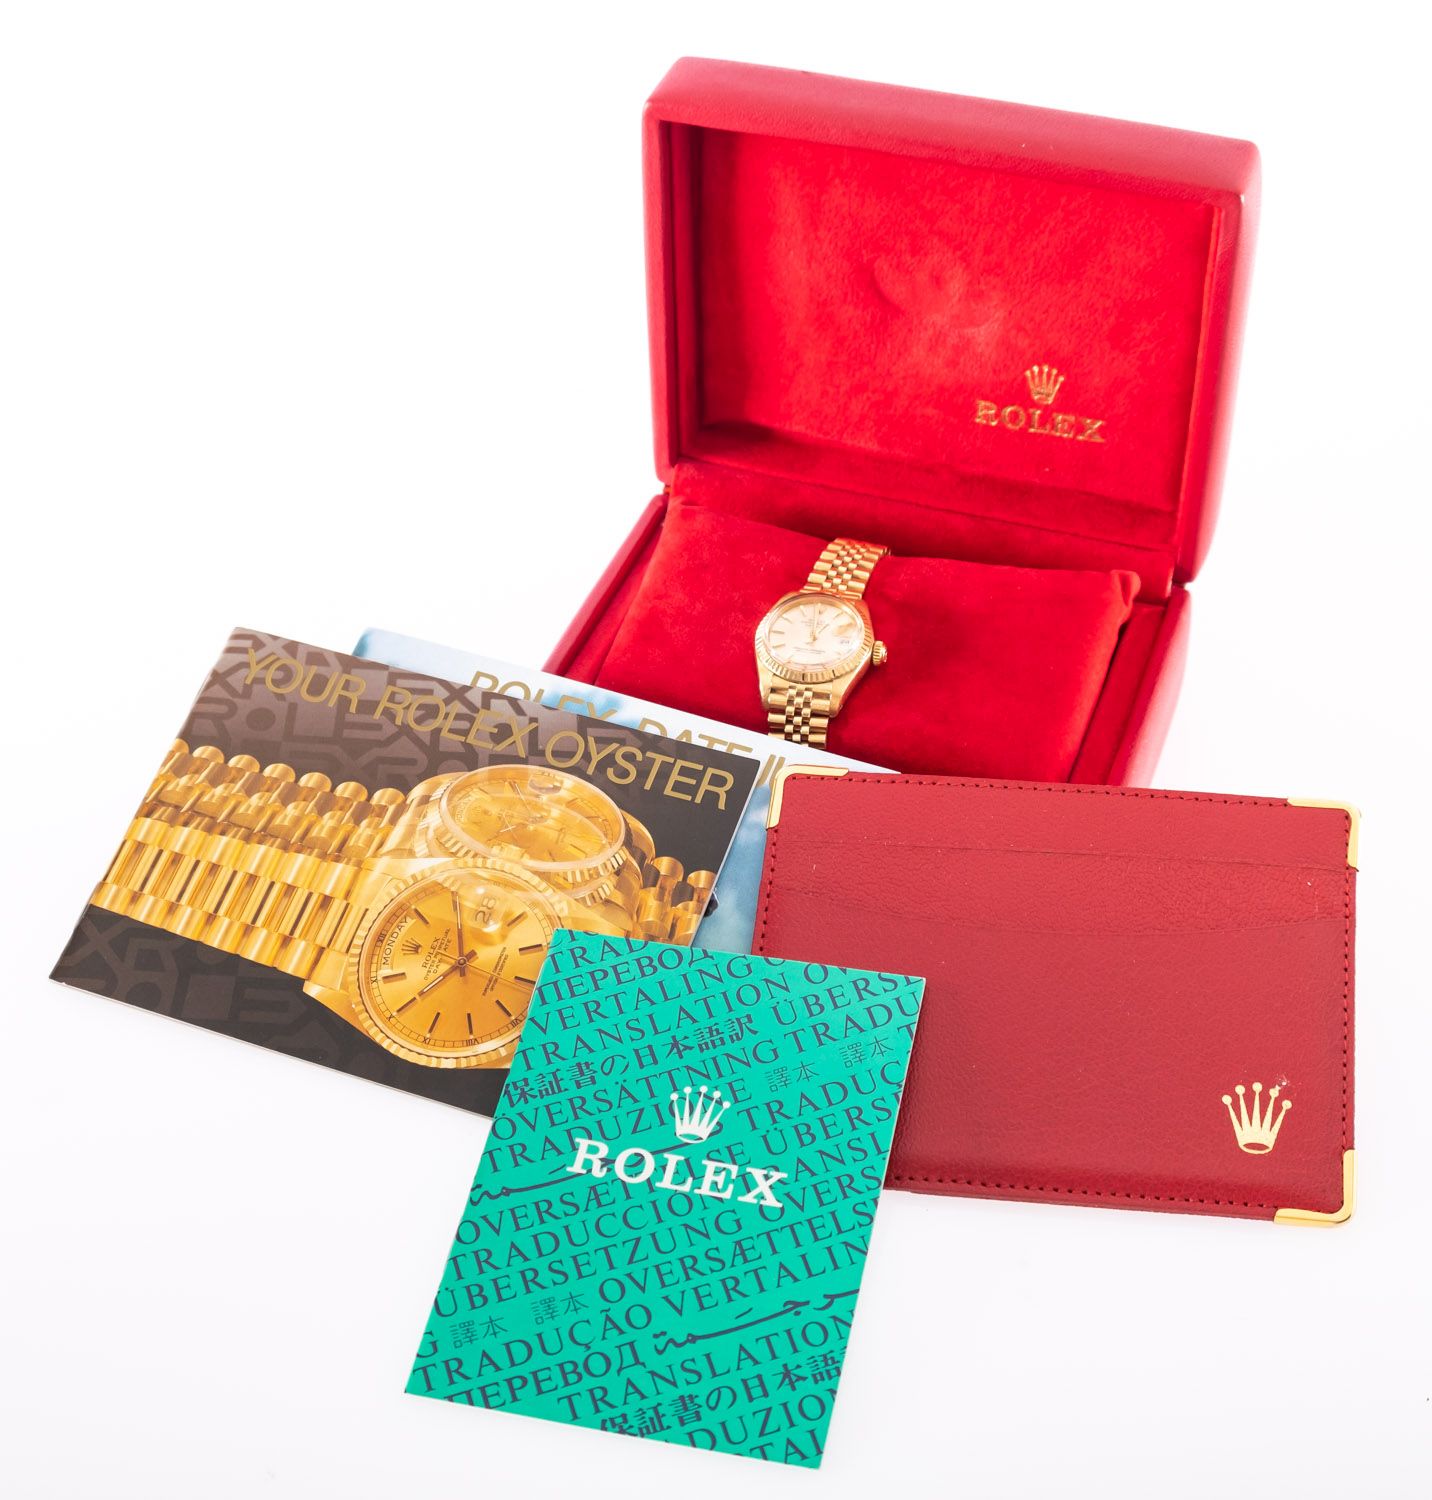 Rolex Datejust an 18ct gold lady's wristwatch the dial with raised baton numerals, baton hands,